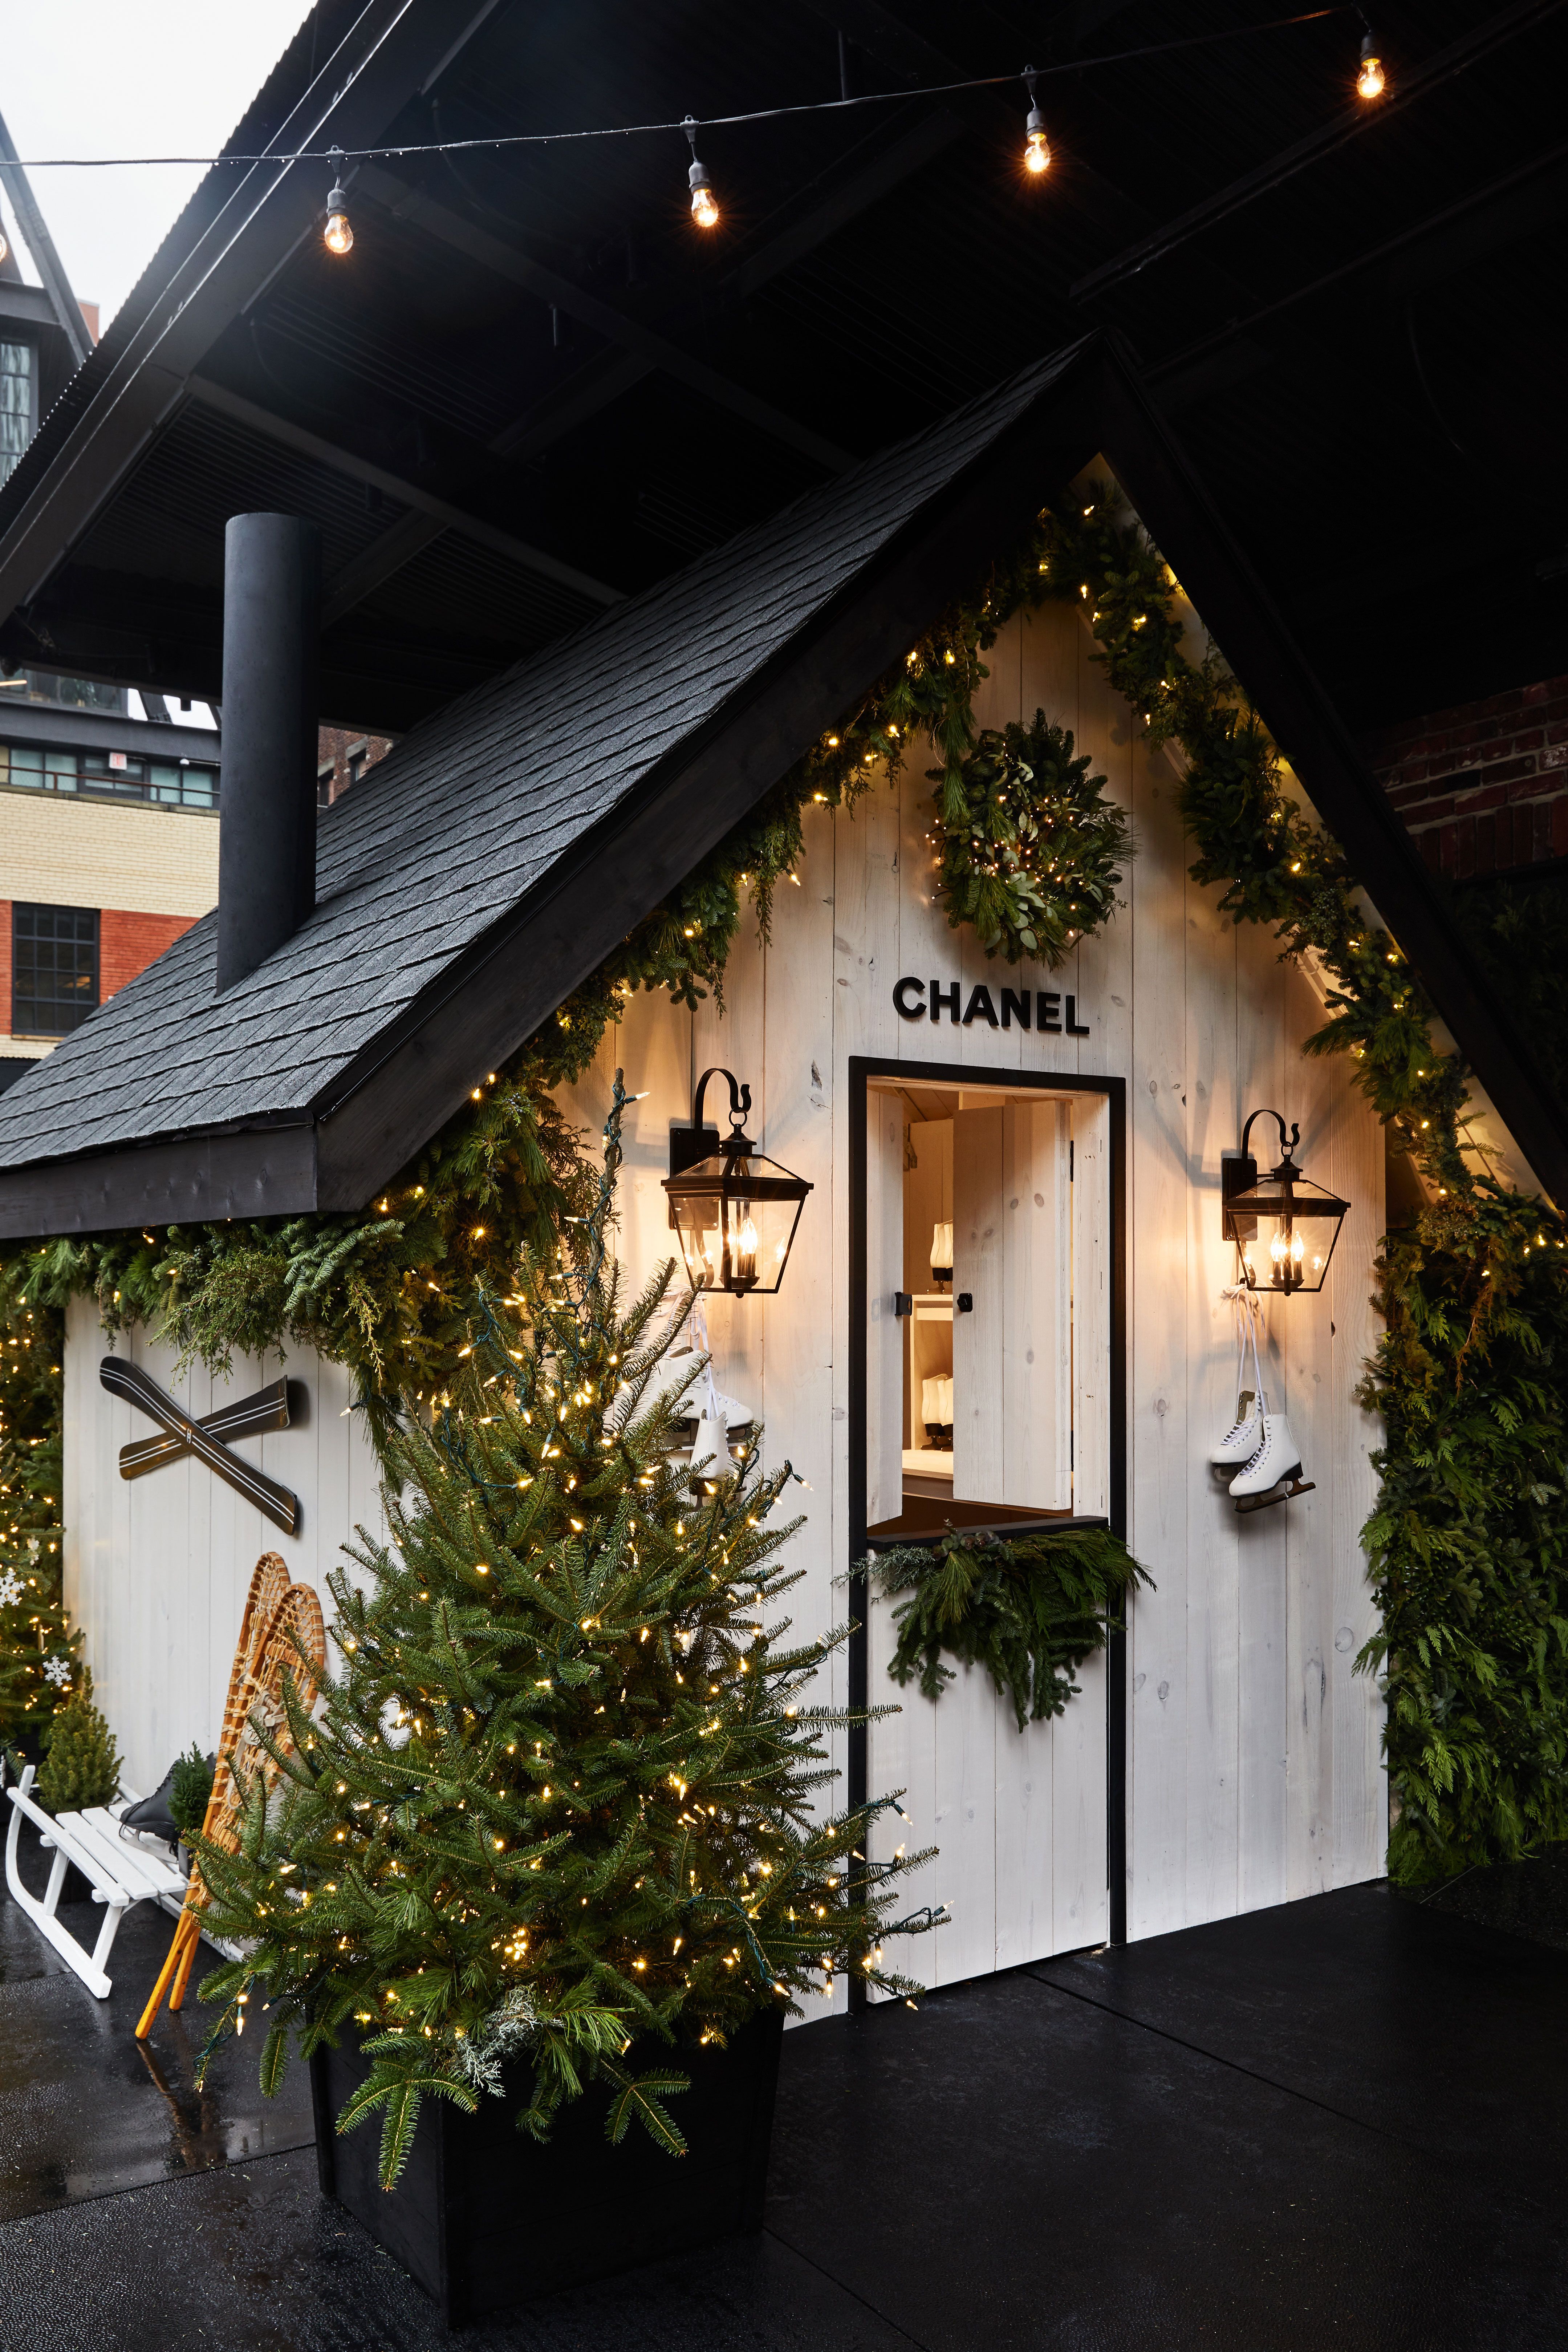 Chanel Celebrates the Holiday Season and the No. 5 Fragrance